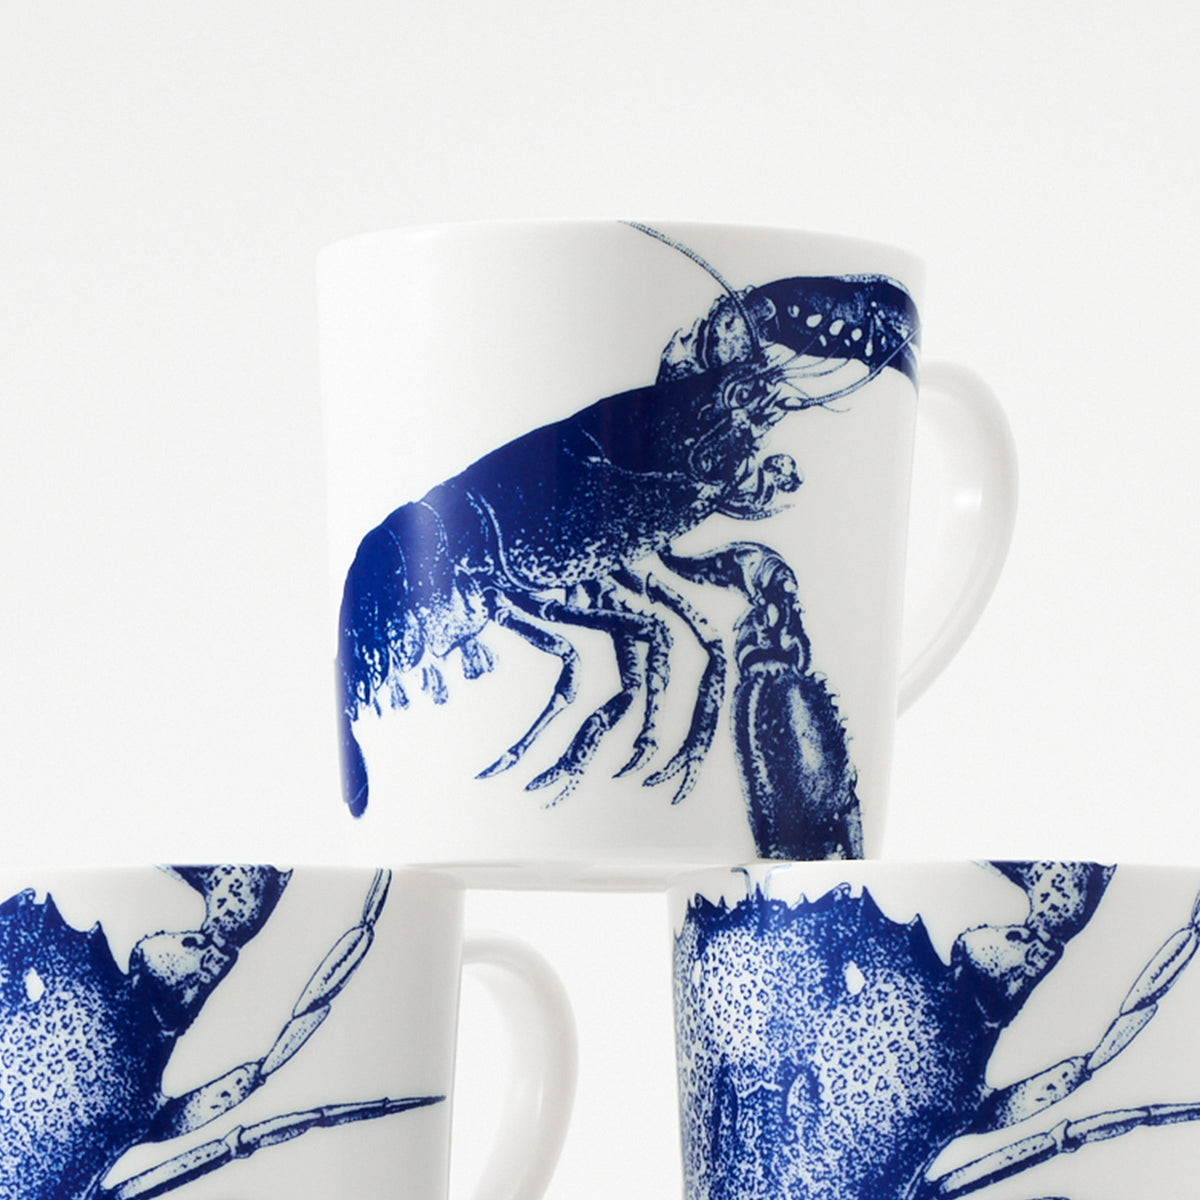 Three high-fired porcelain **Lobster Mugs** featuring a blue lobster design from **Caskata Artisanal Home** are stacked, with the top mug prominently displaying the full lobster image. Made in Sri Lanka, these unique lobster mugs add a touch of coastal charm to any kitchen.